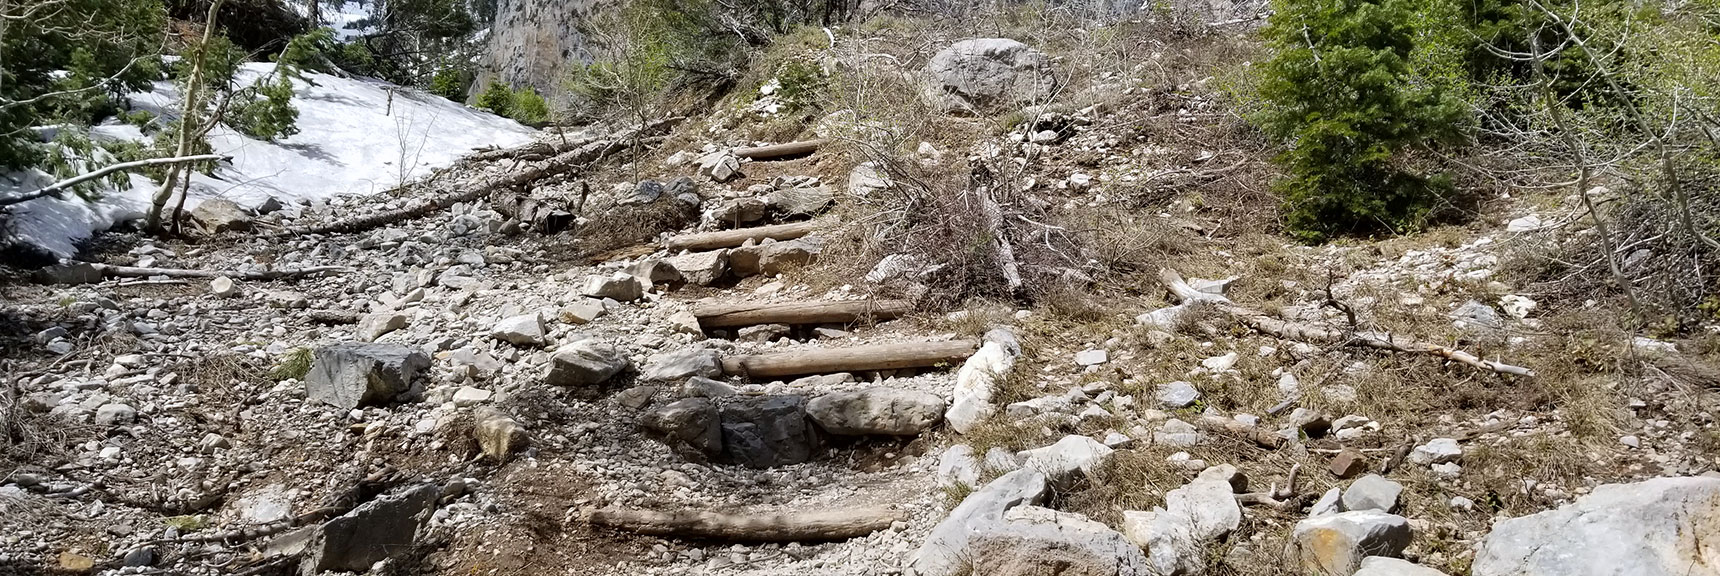 Stairway on South Climb Trail to Griffith Peak in Mt Charleston Wilderness